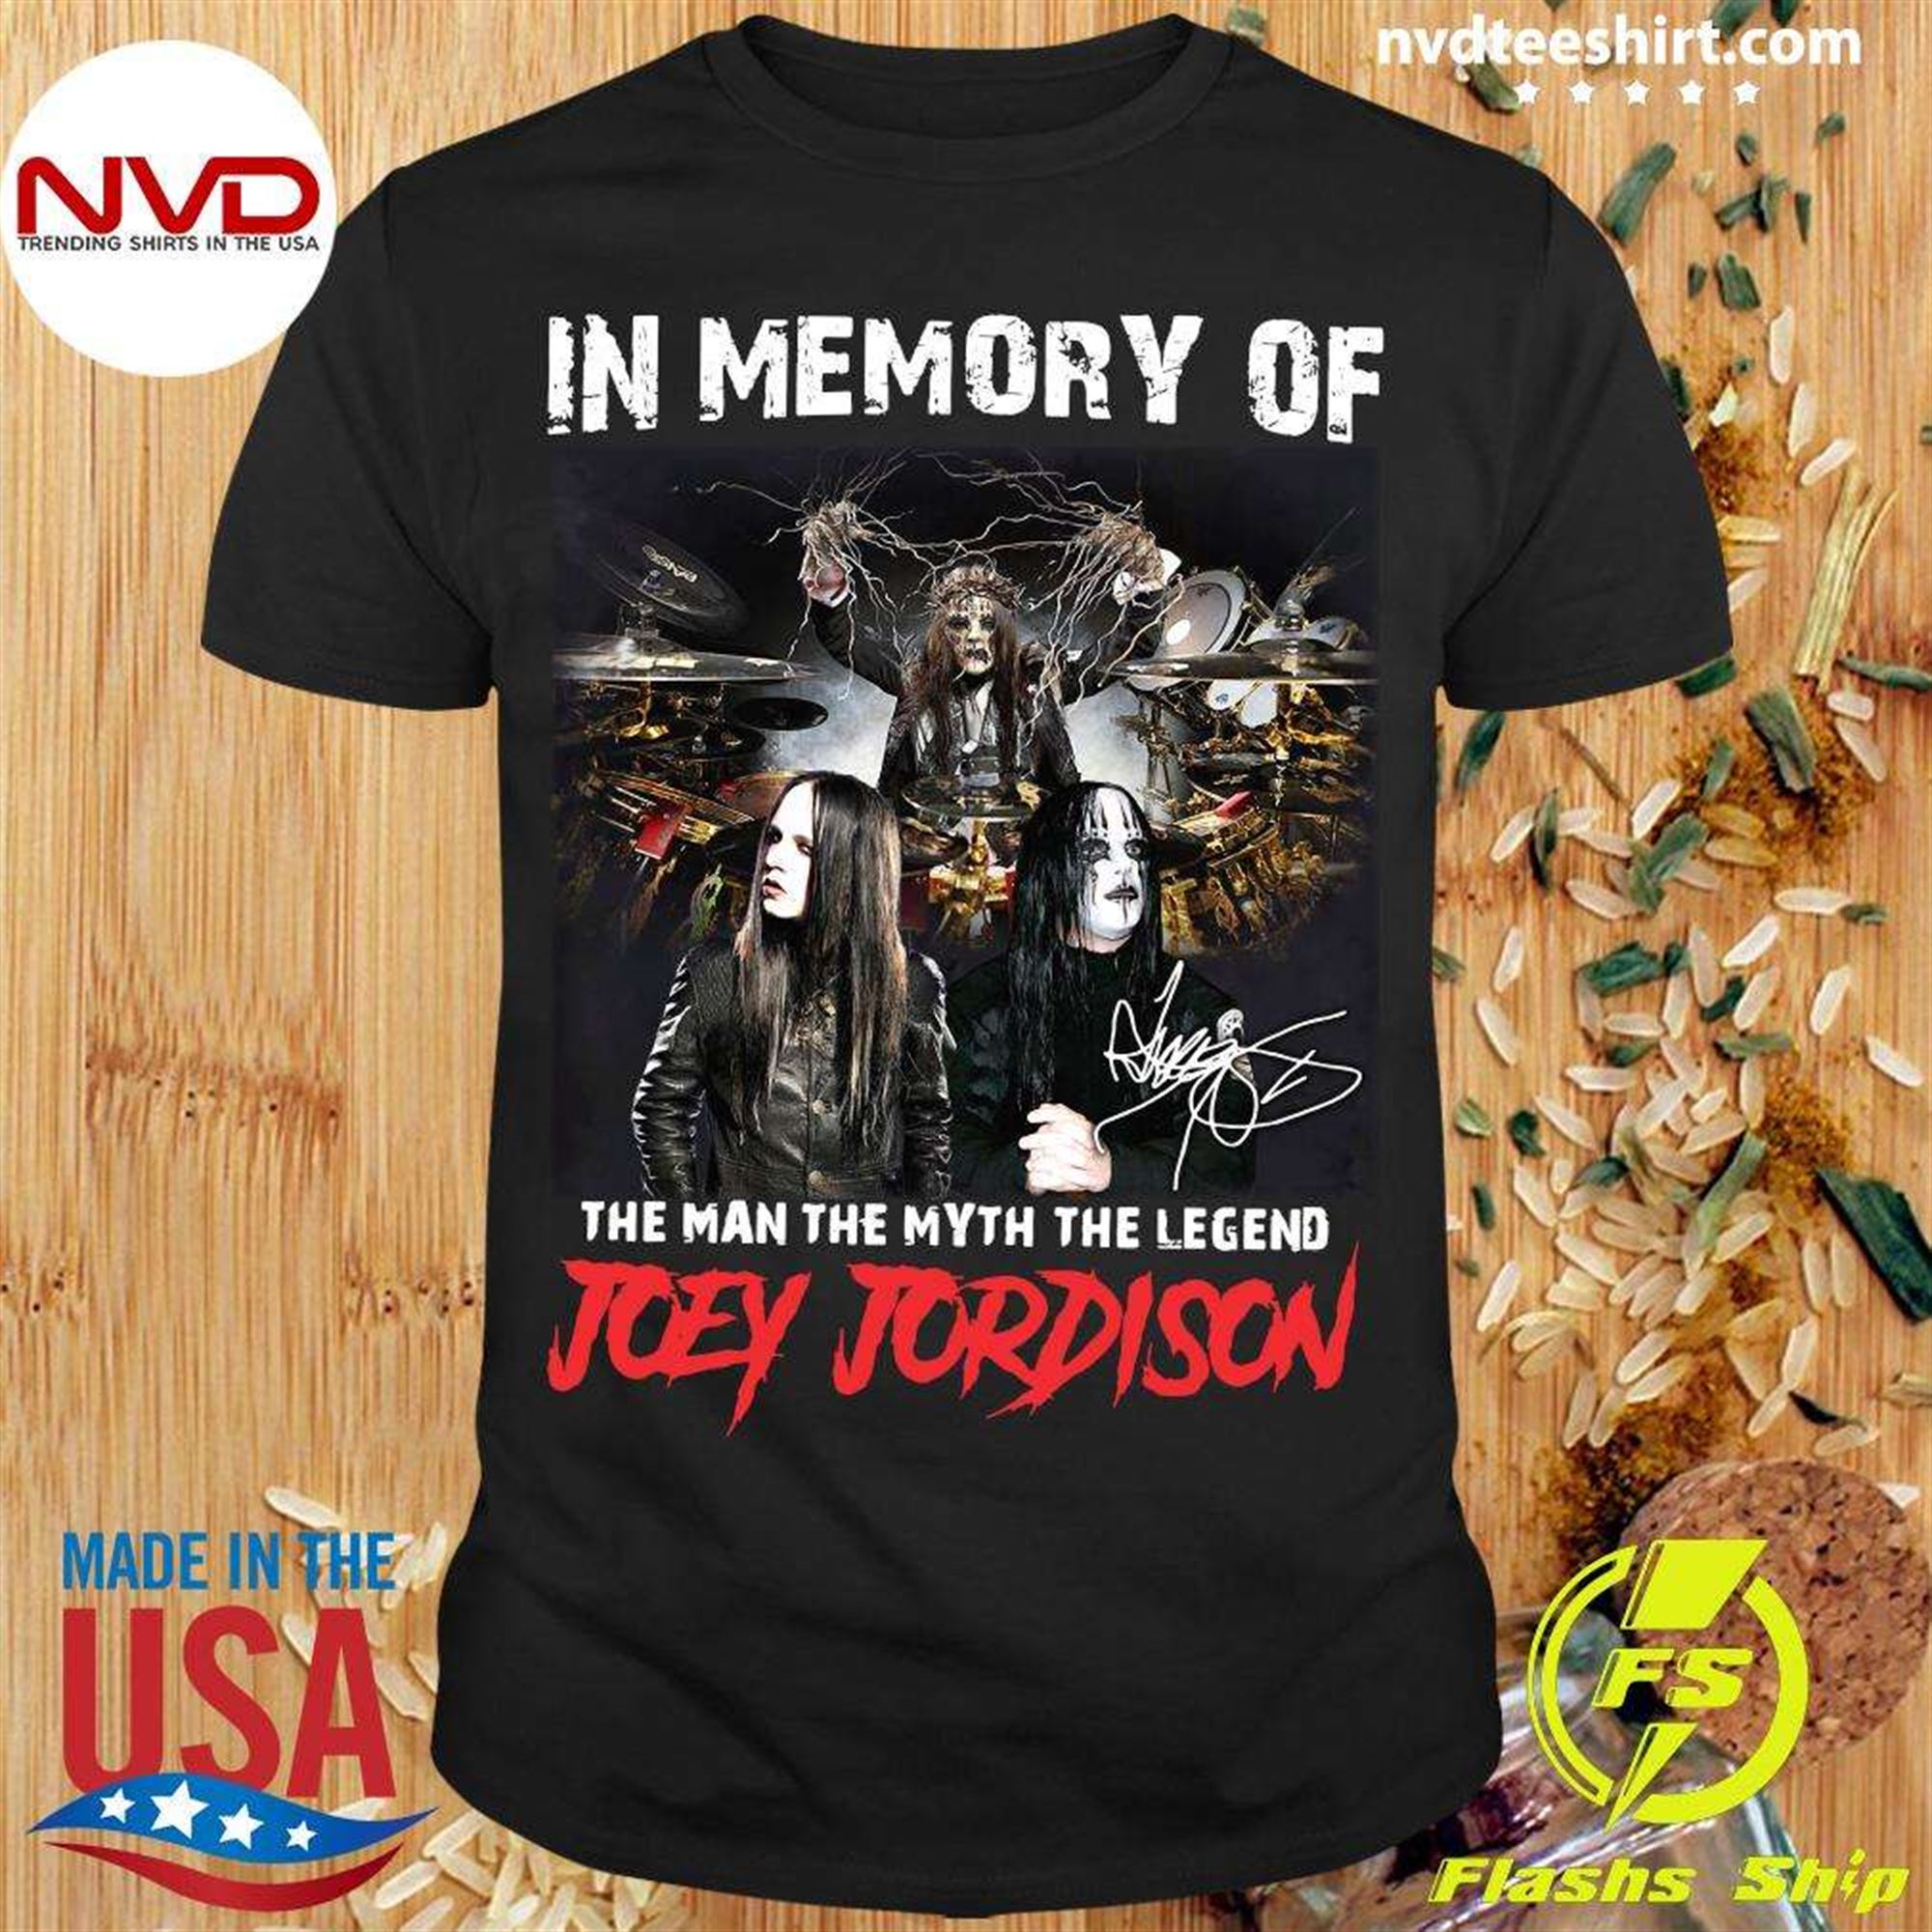 Official In Memory Of The Man The Myth The Legend Joey Jordison Signature T-shirt Full Size Up To 5xl